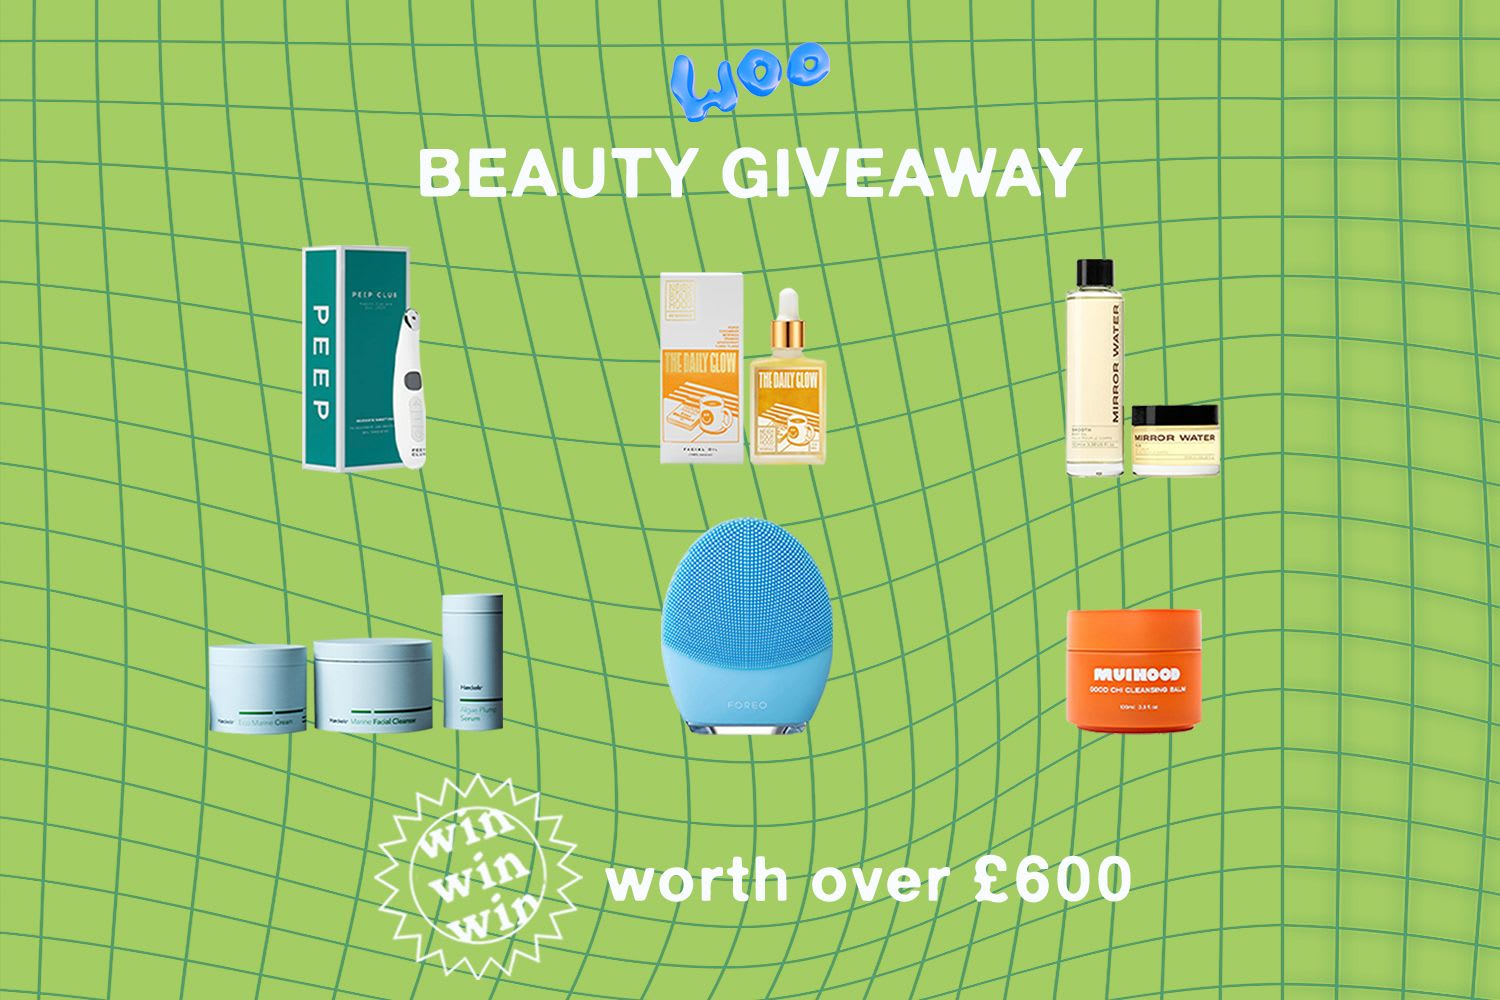 Get your summer glow on with our beauty giveaway worth over £600